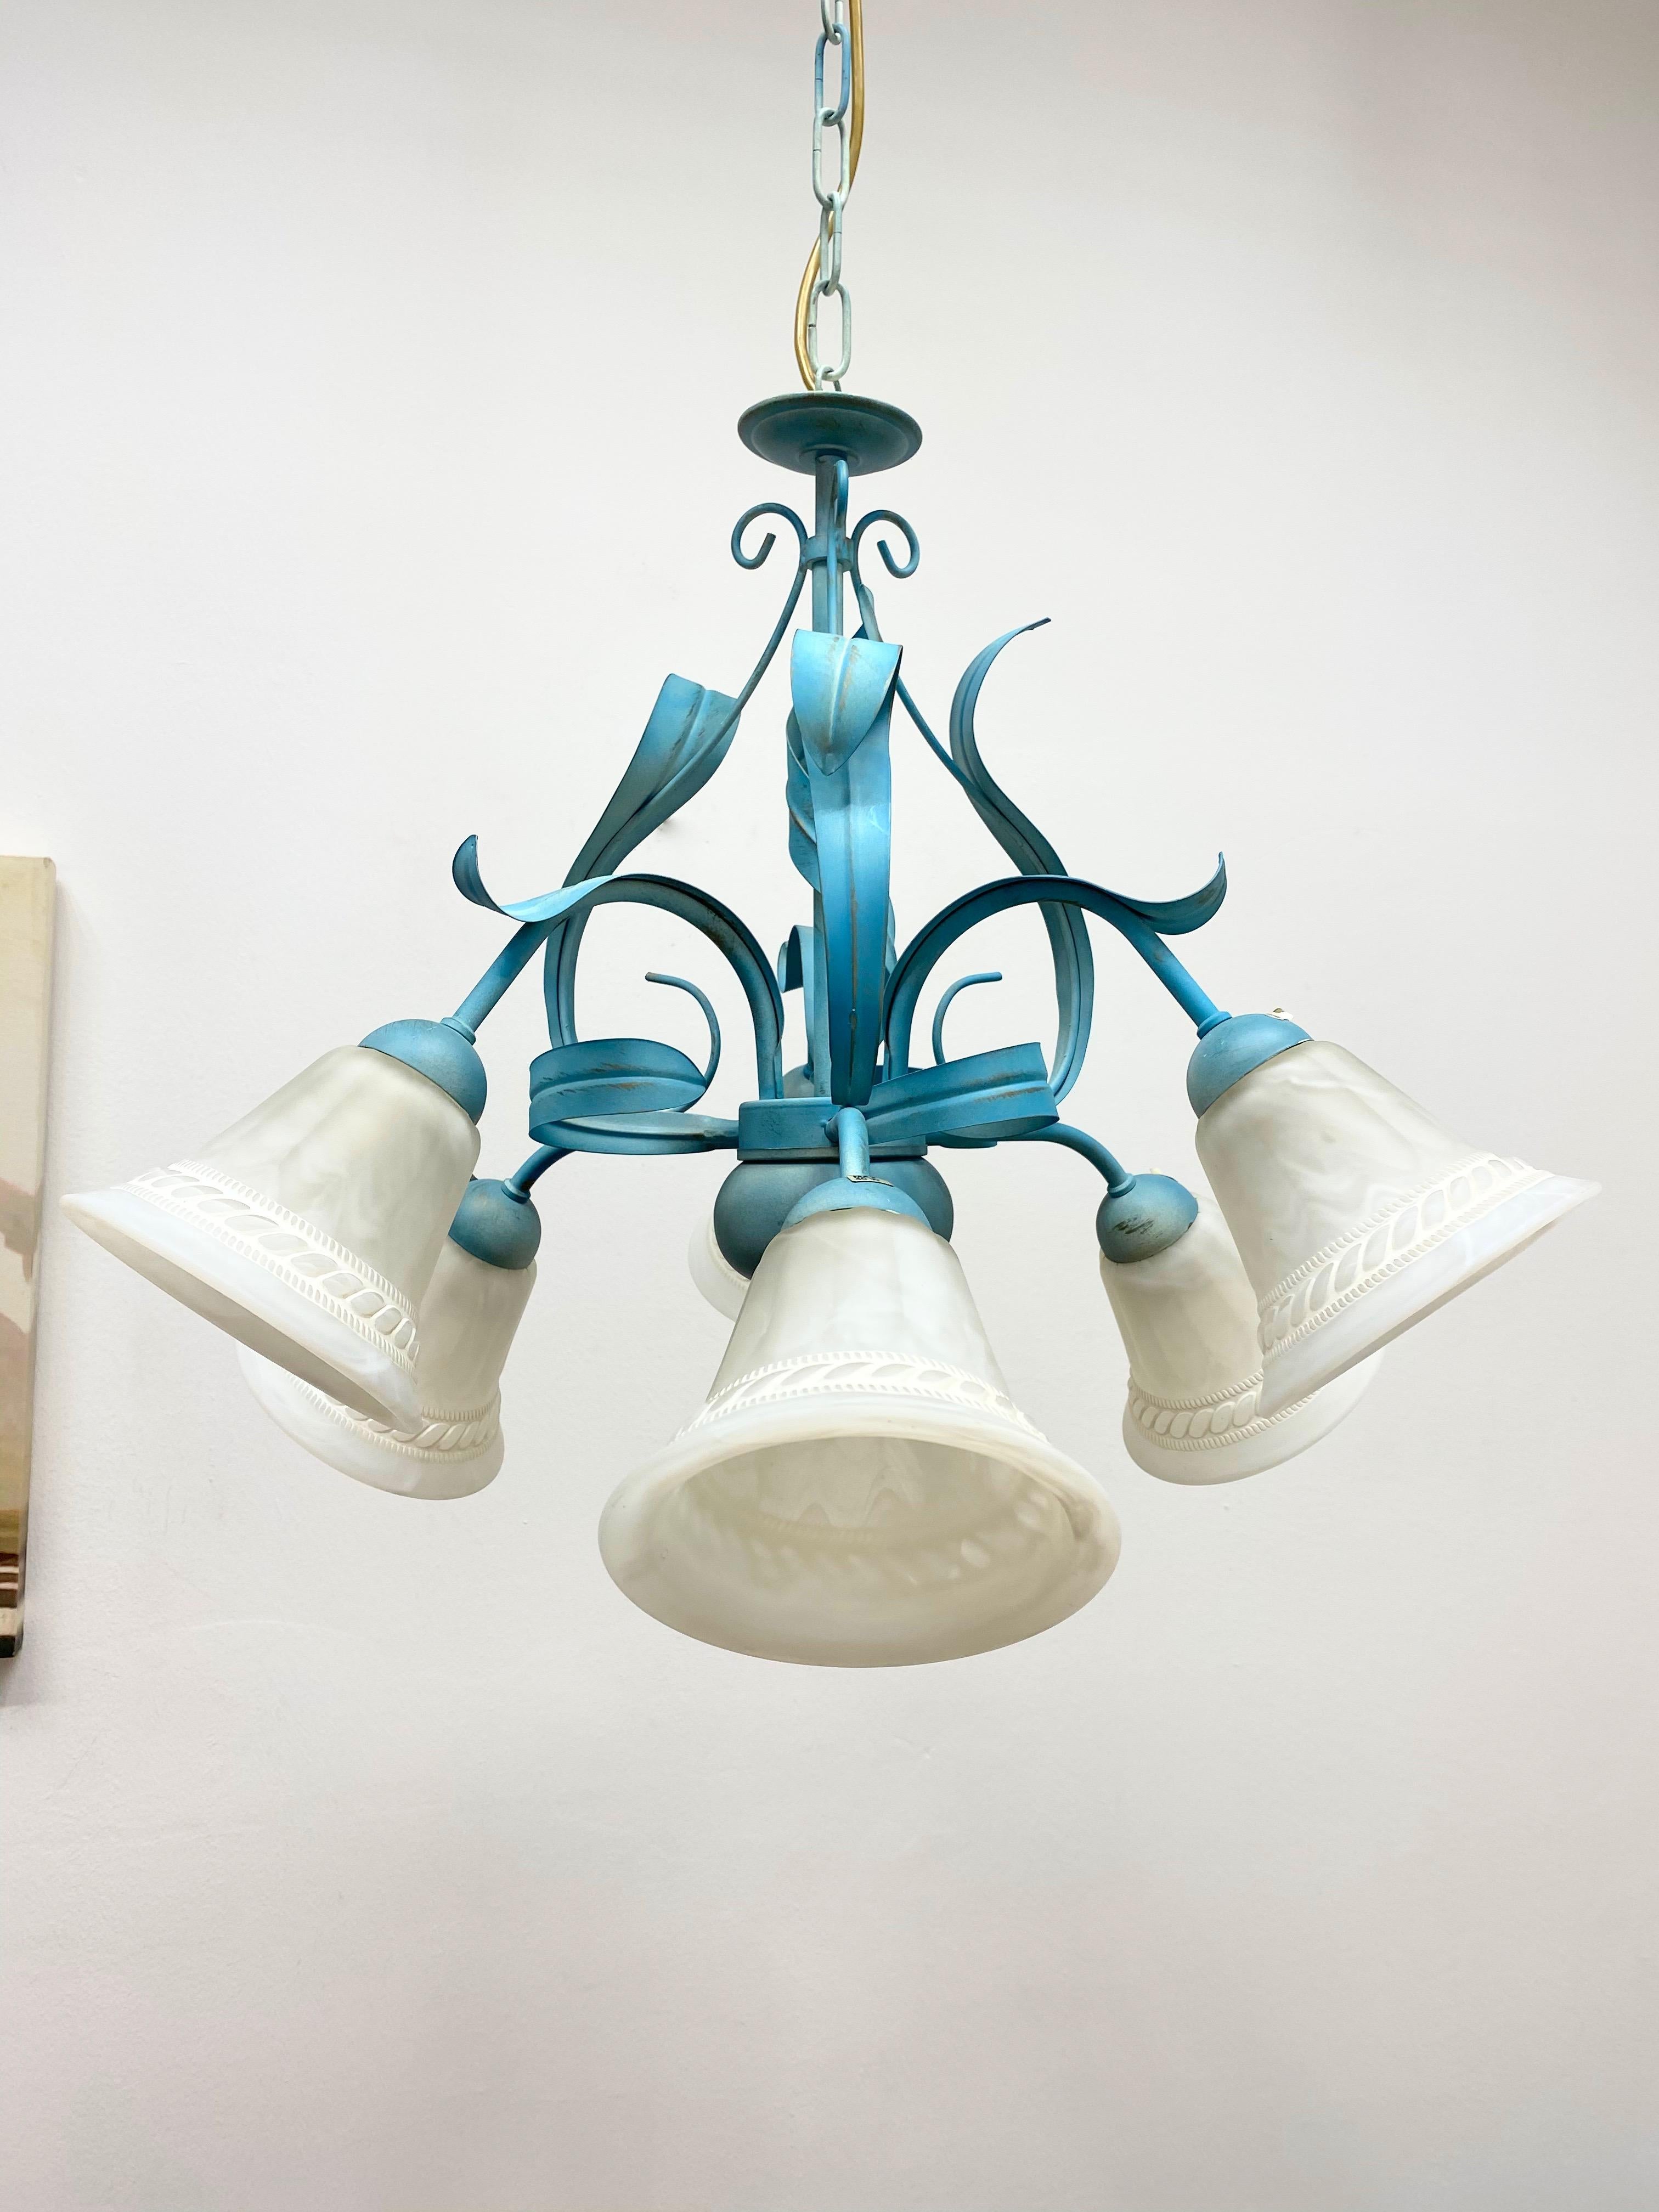 Tuscany Style Chandelier Pendant Light Glass & Blue Colored Metal, 1980s, Italy For Sale 2